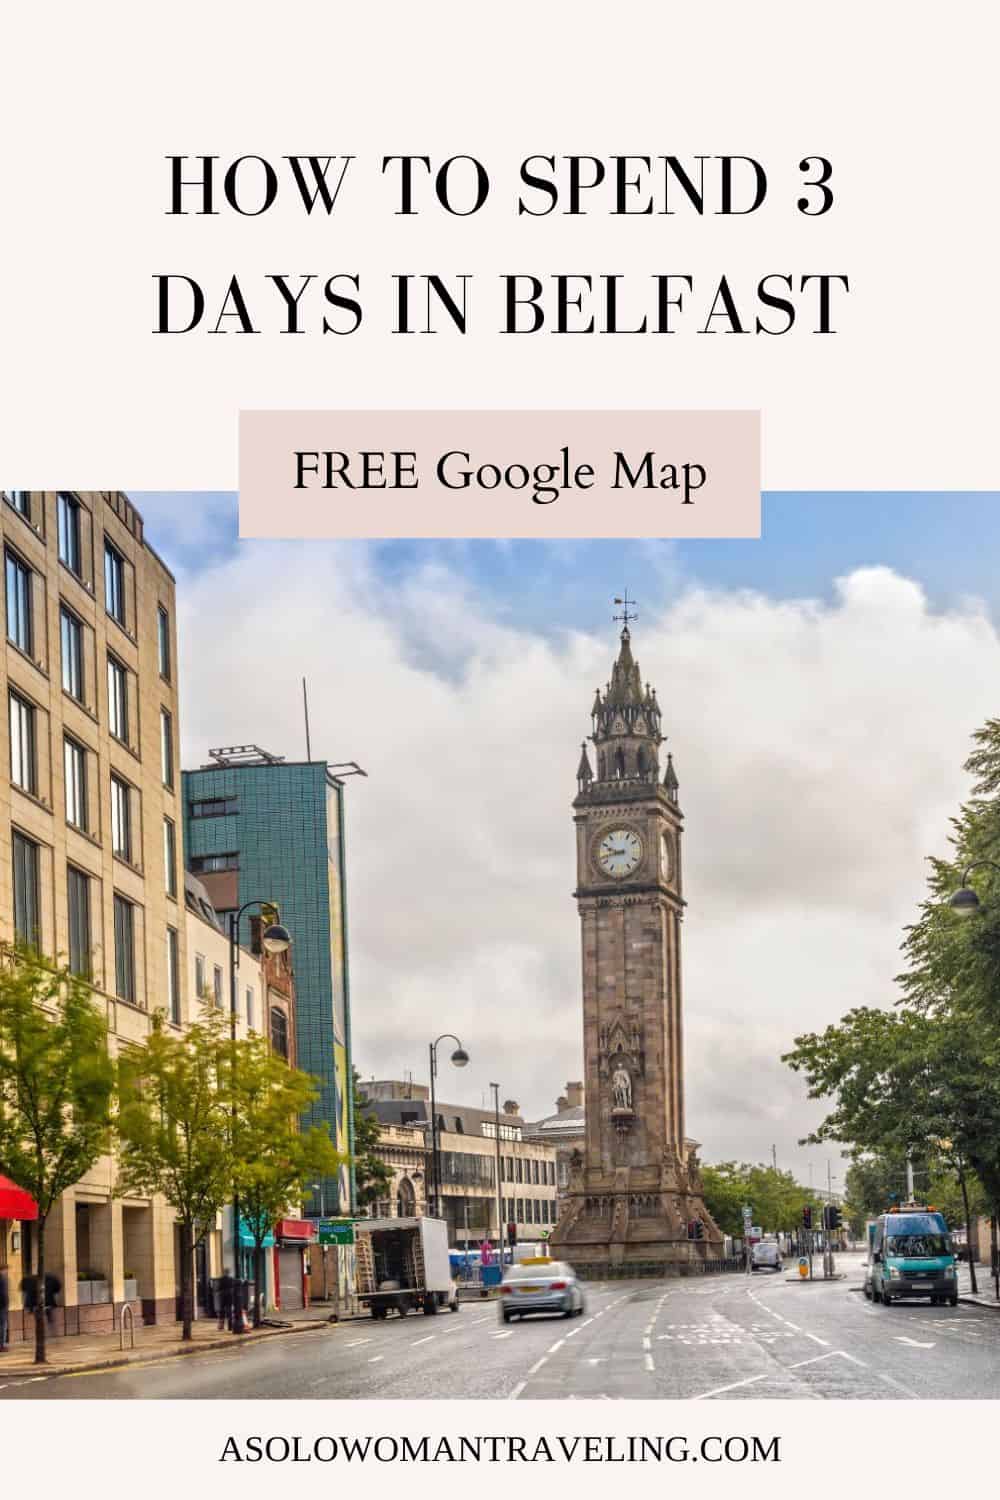 How to Spend 3 days in Belfast